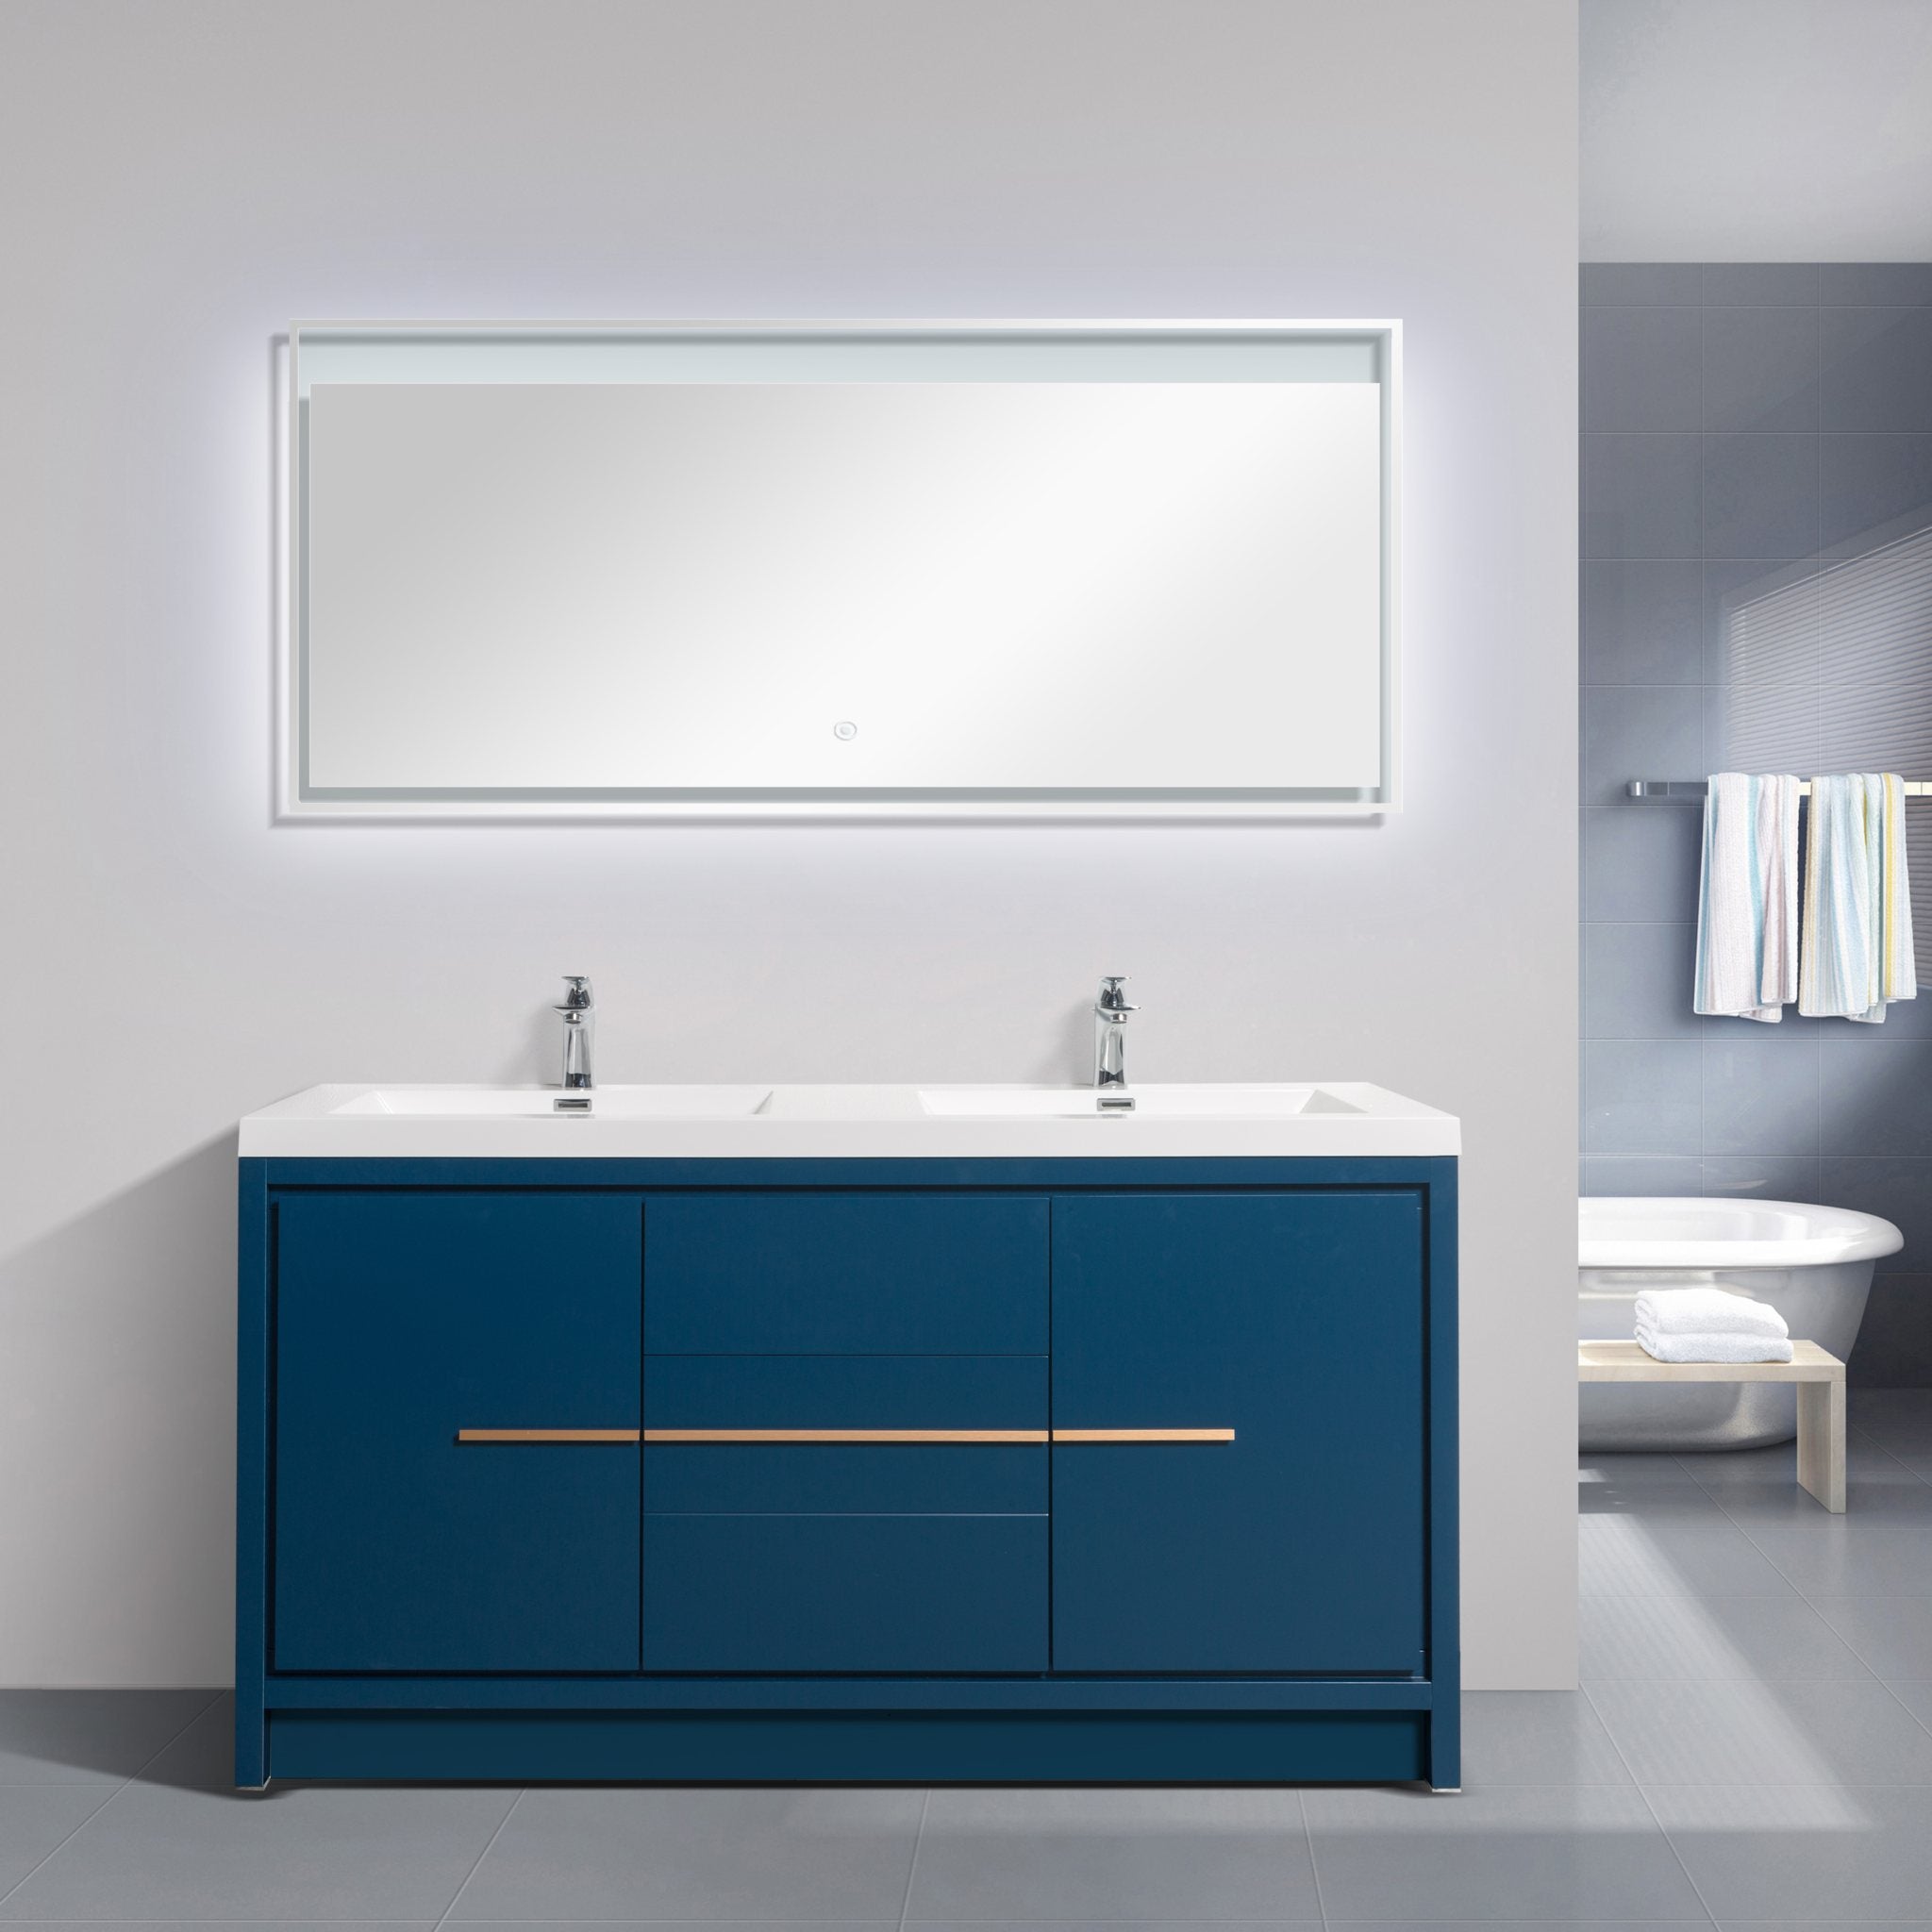 Granada 59 Matte Blue With Brush Rose Gold Handle Cabinet, Square Cultured Marble Double Sink, Free Standing Modern Vanity Set